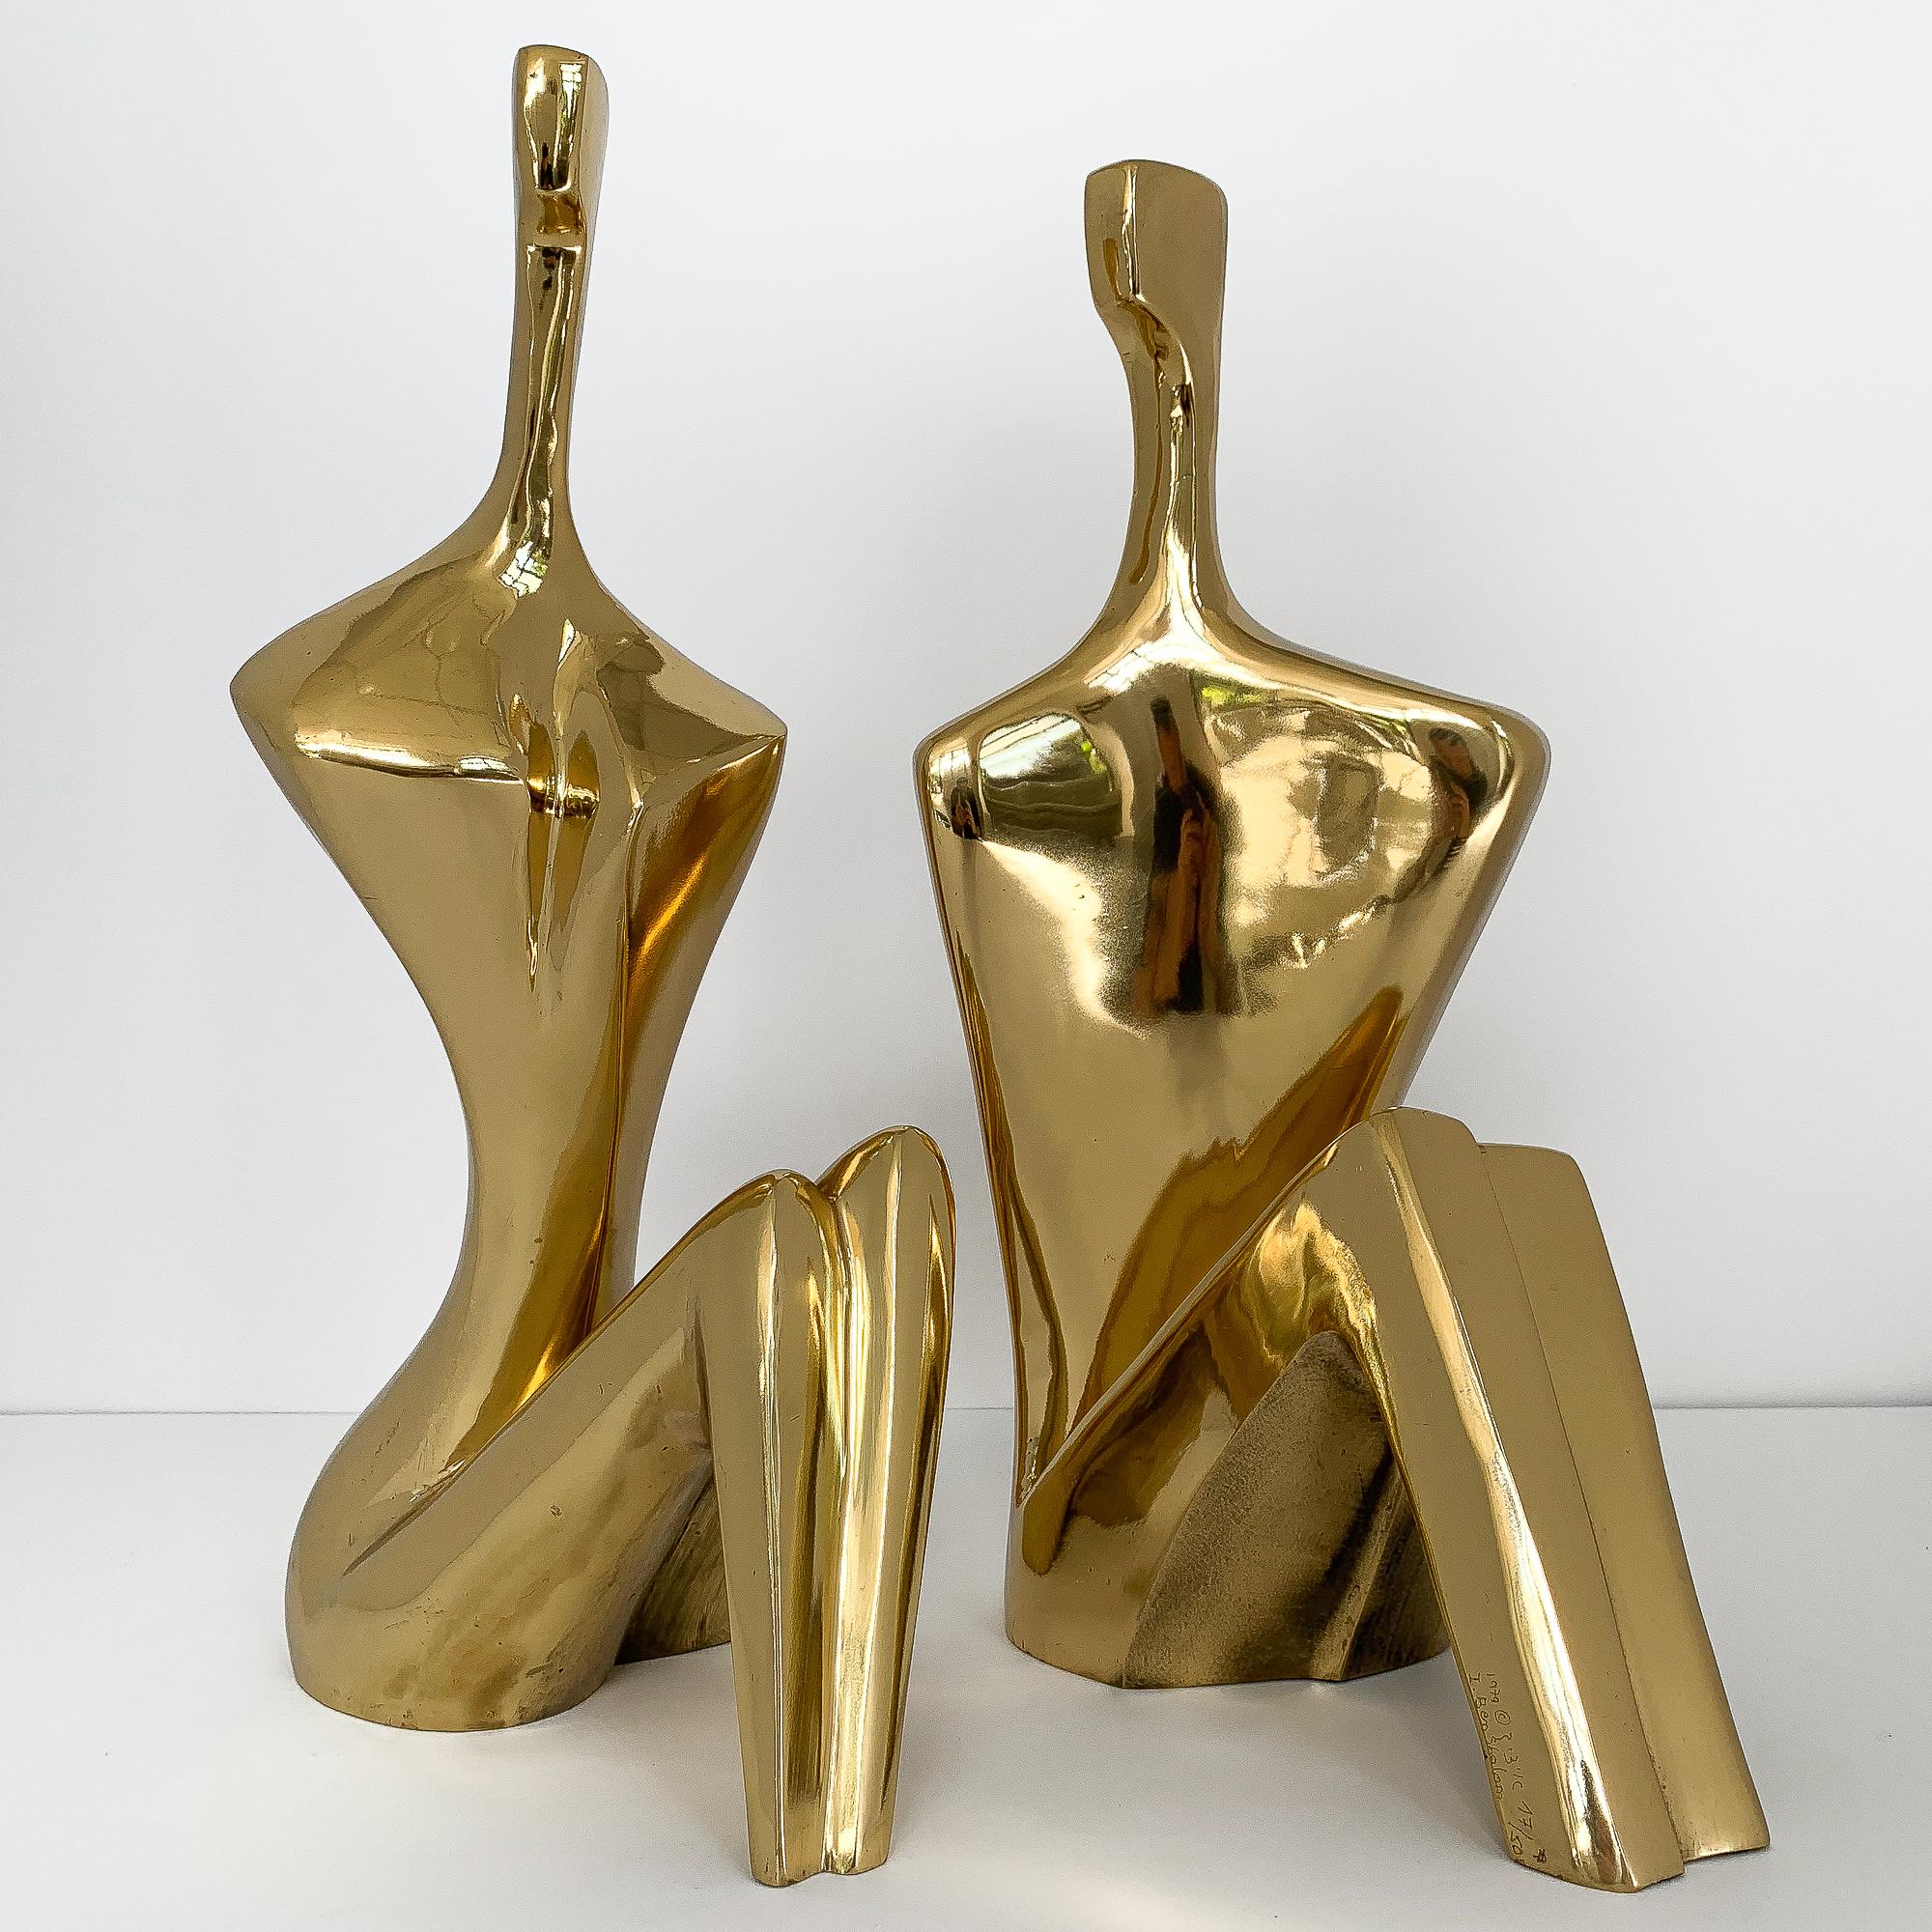 Itzik Ben Shalom (Israel, b 1945) modernist solid bronze sculpture. Abstract two seated male and female figures titled 